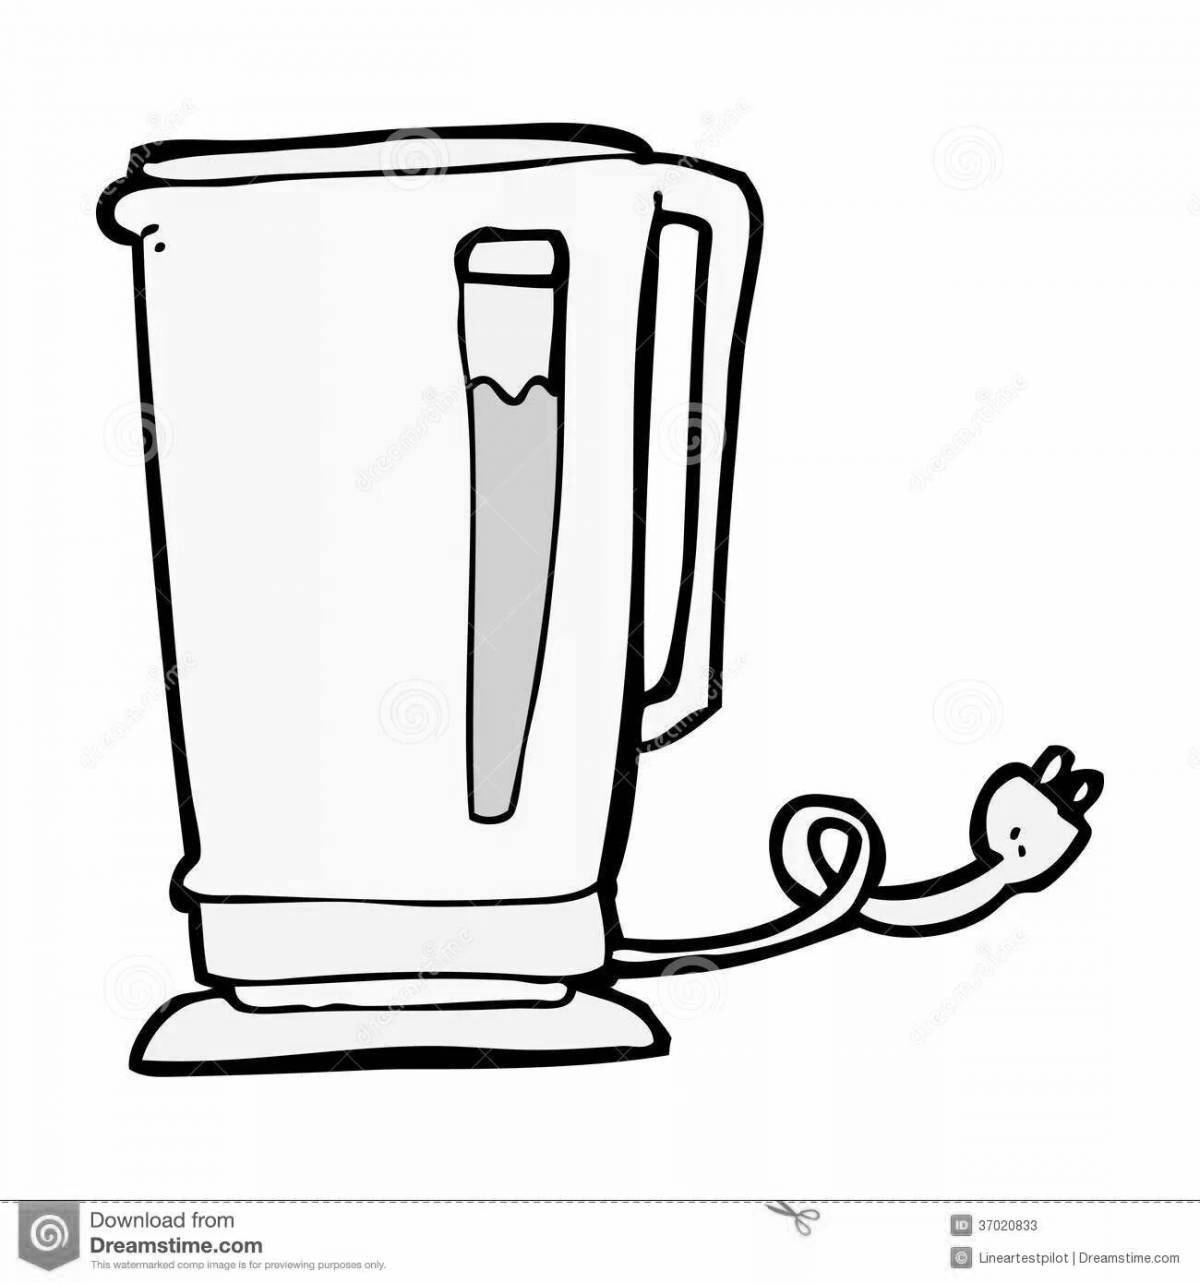 Great electric kettle coloring for kids